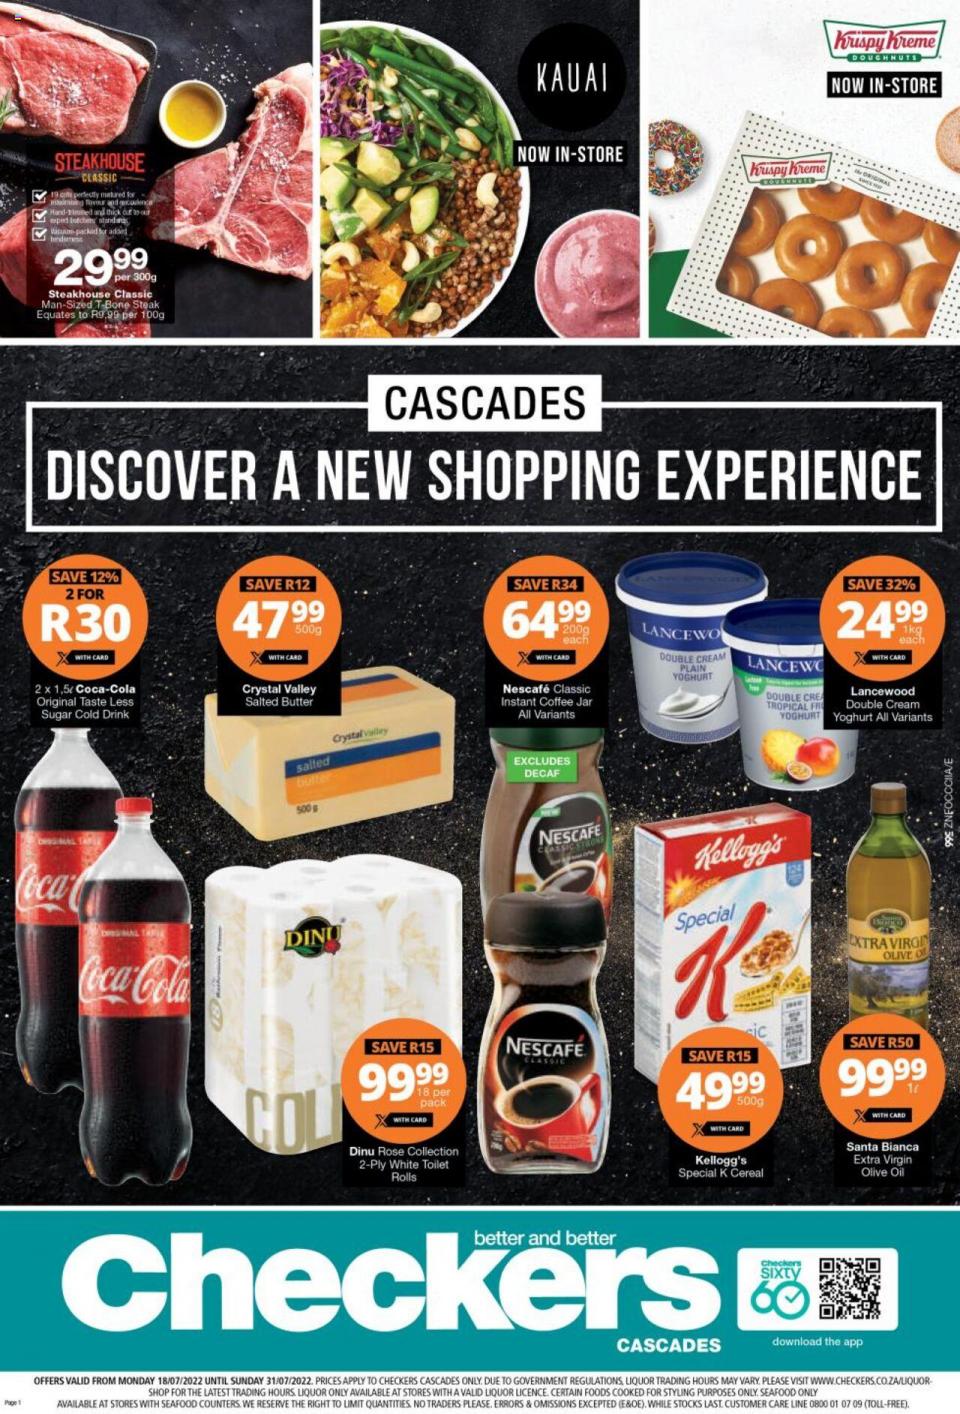 Checkers Specials Cascades Store Relaunch 18 – 31 July 2022